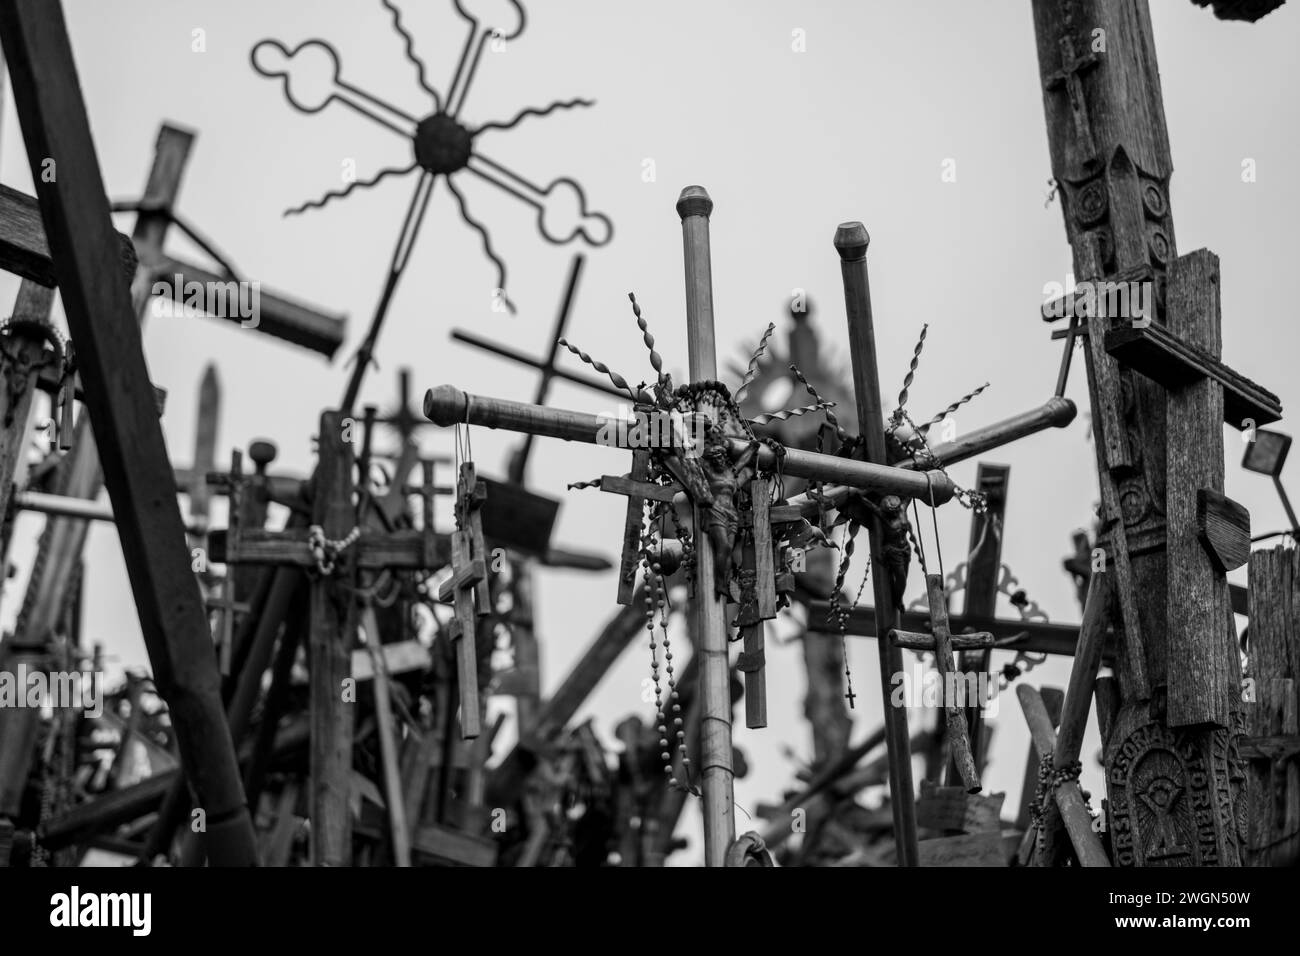 For centuries, Lithuania's Hill of Crosses has been a place of pilgrimage and prayer, drawing visitors from near and far. Stock Photo